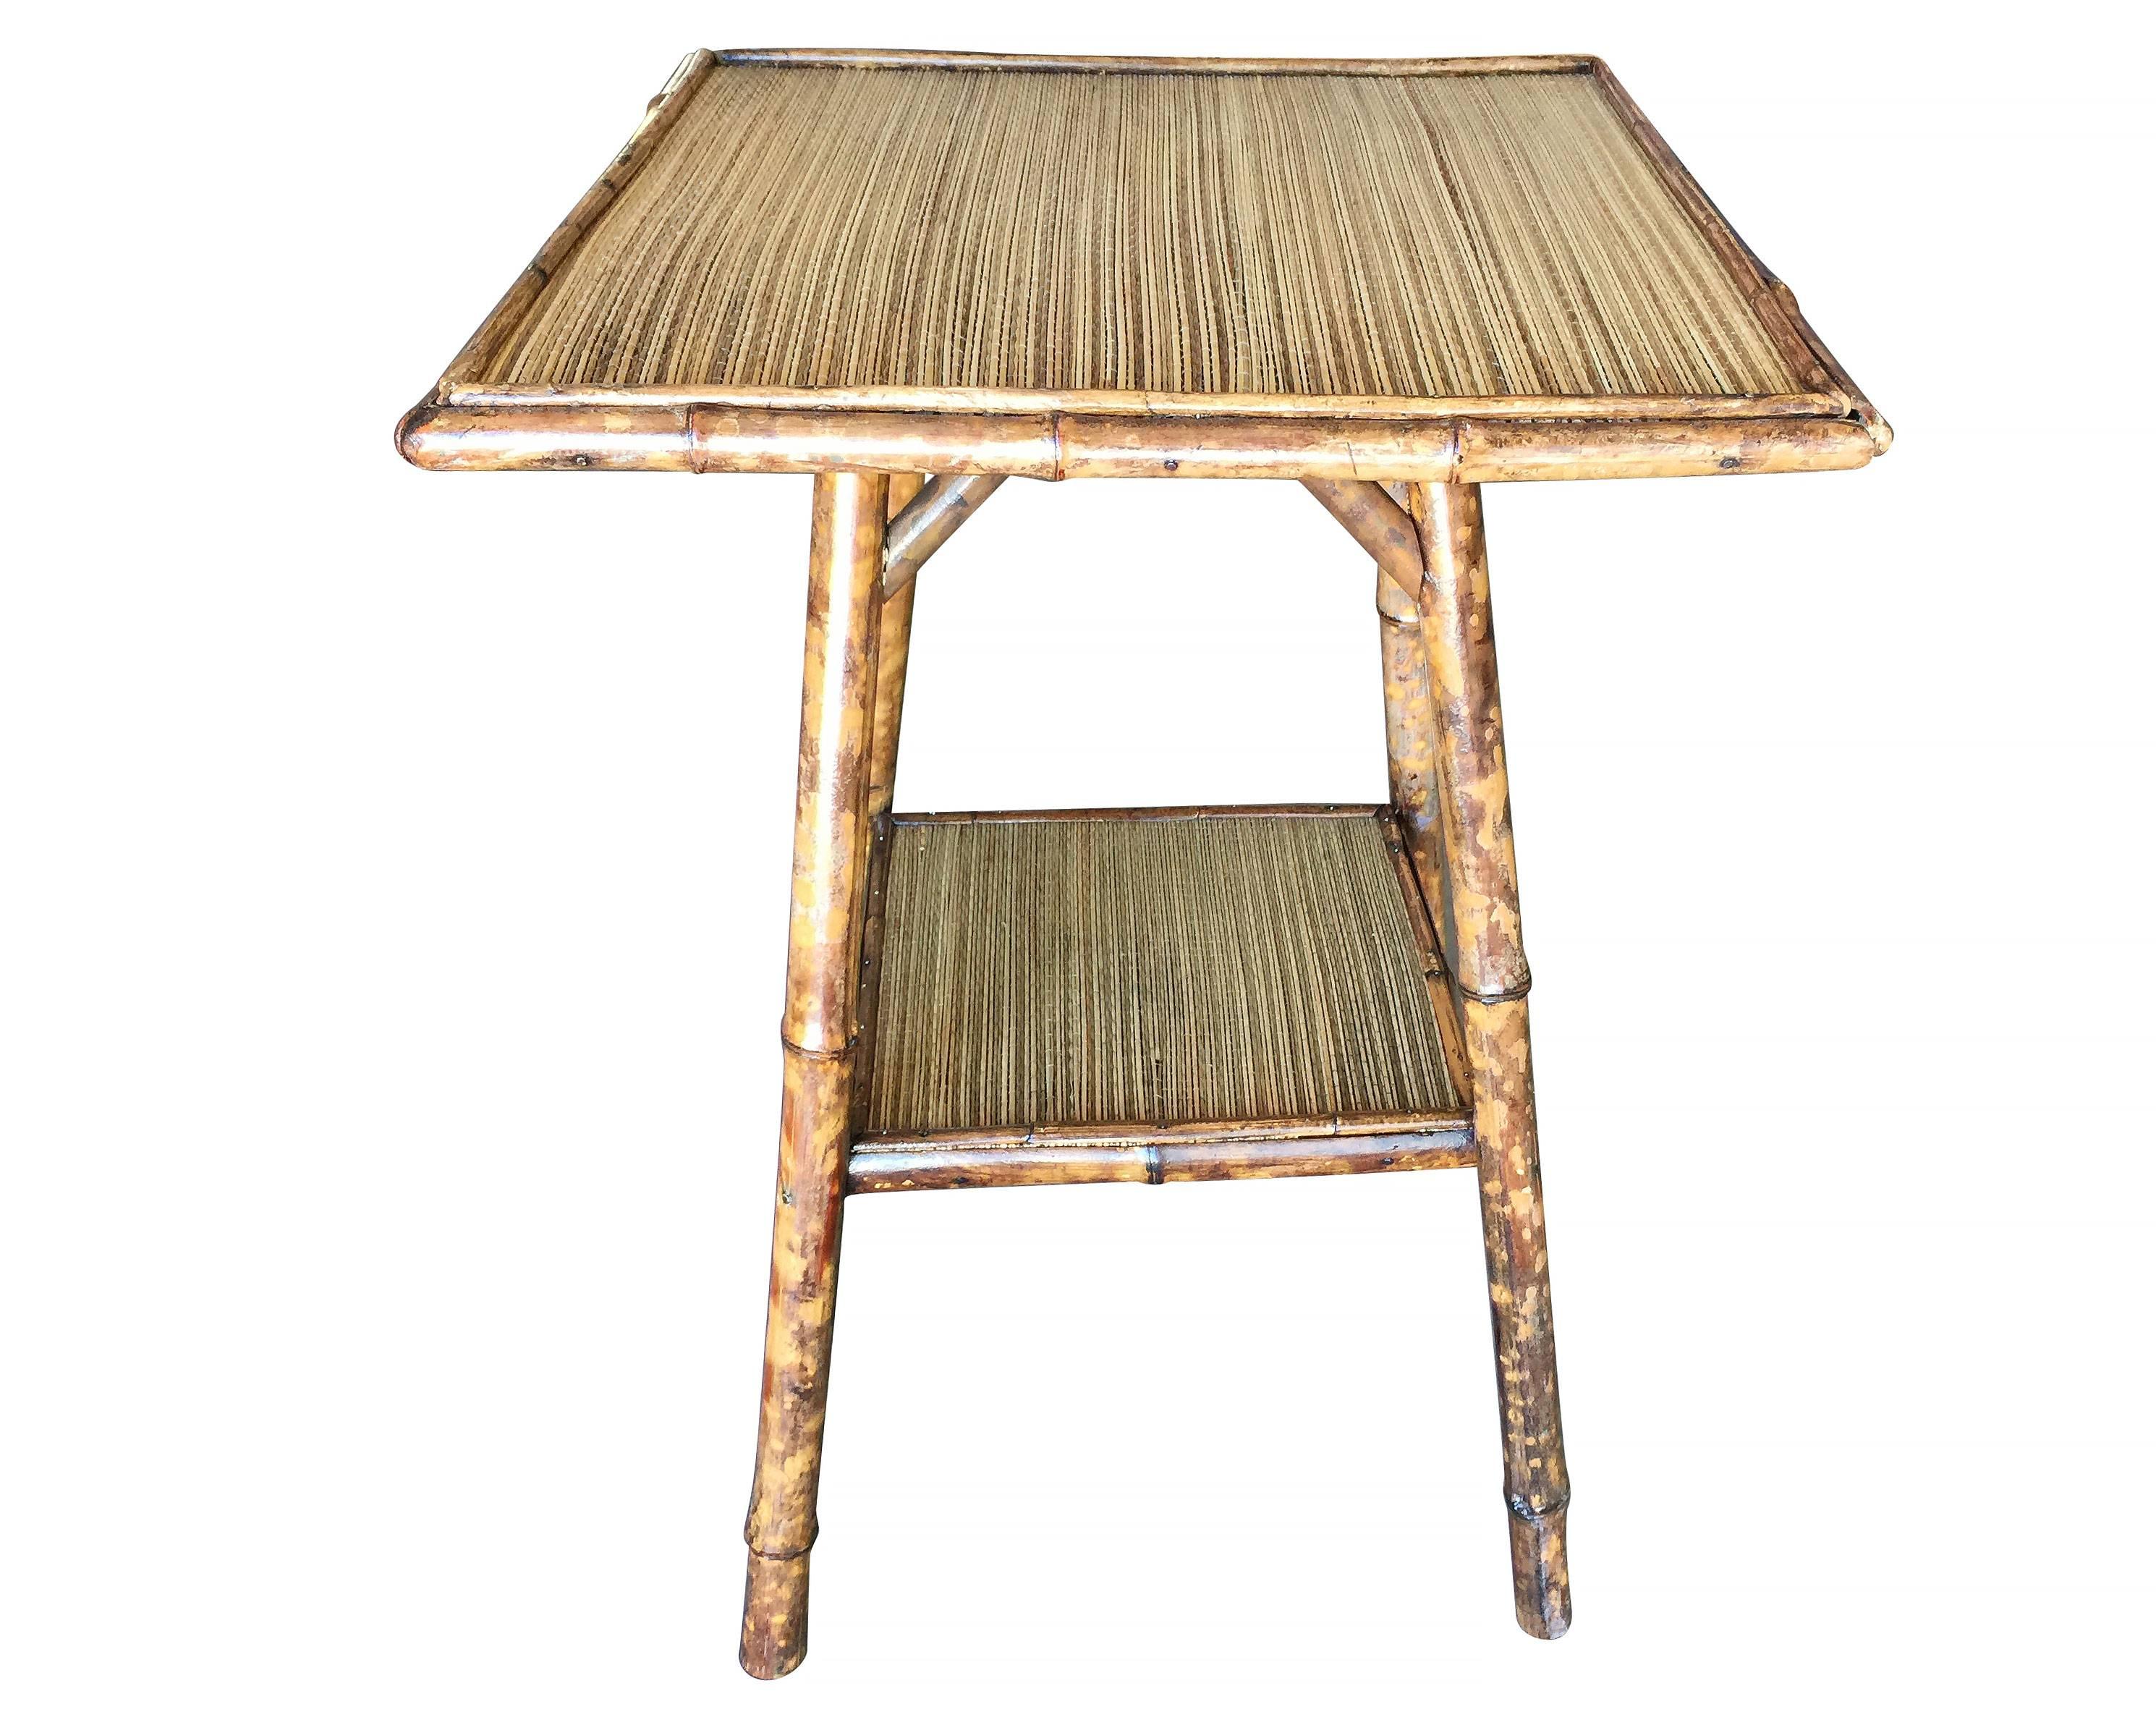 Late Victorian Restored Tiger Bamboo Pedestal Side Table with Slat Bamboo Top